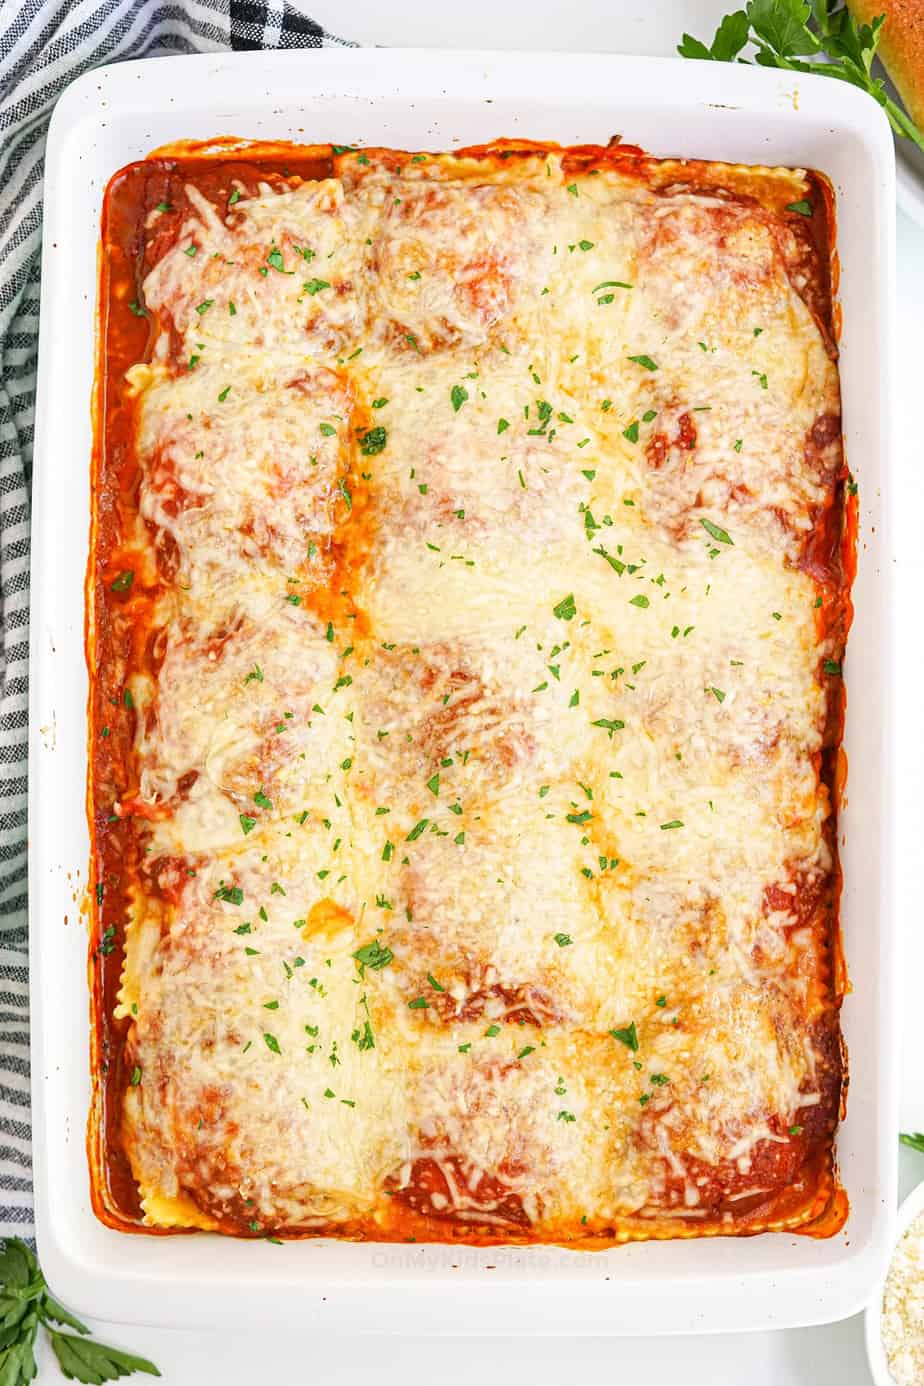 Baked ravioli in a casserole dish from overhead fully cooked.